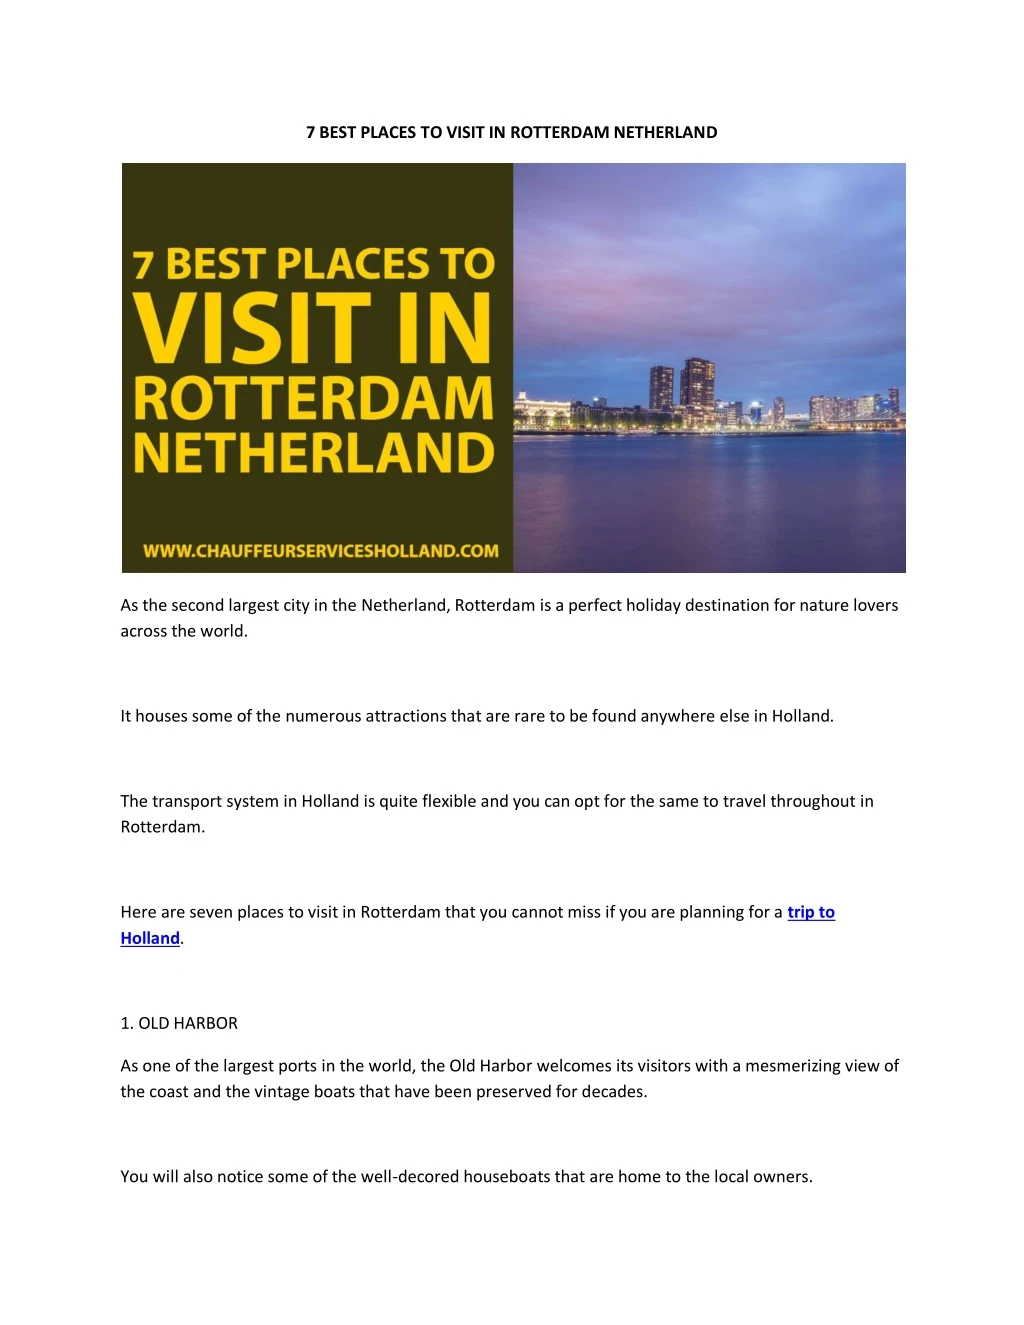 7 best places to visit in rotterdam netherland